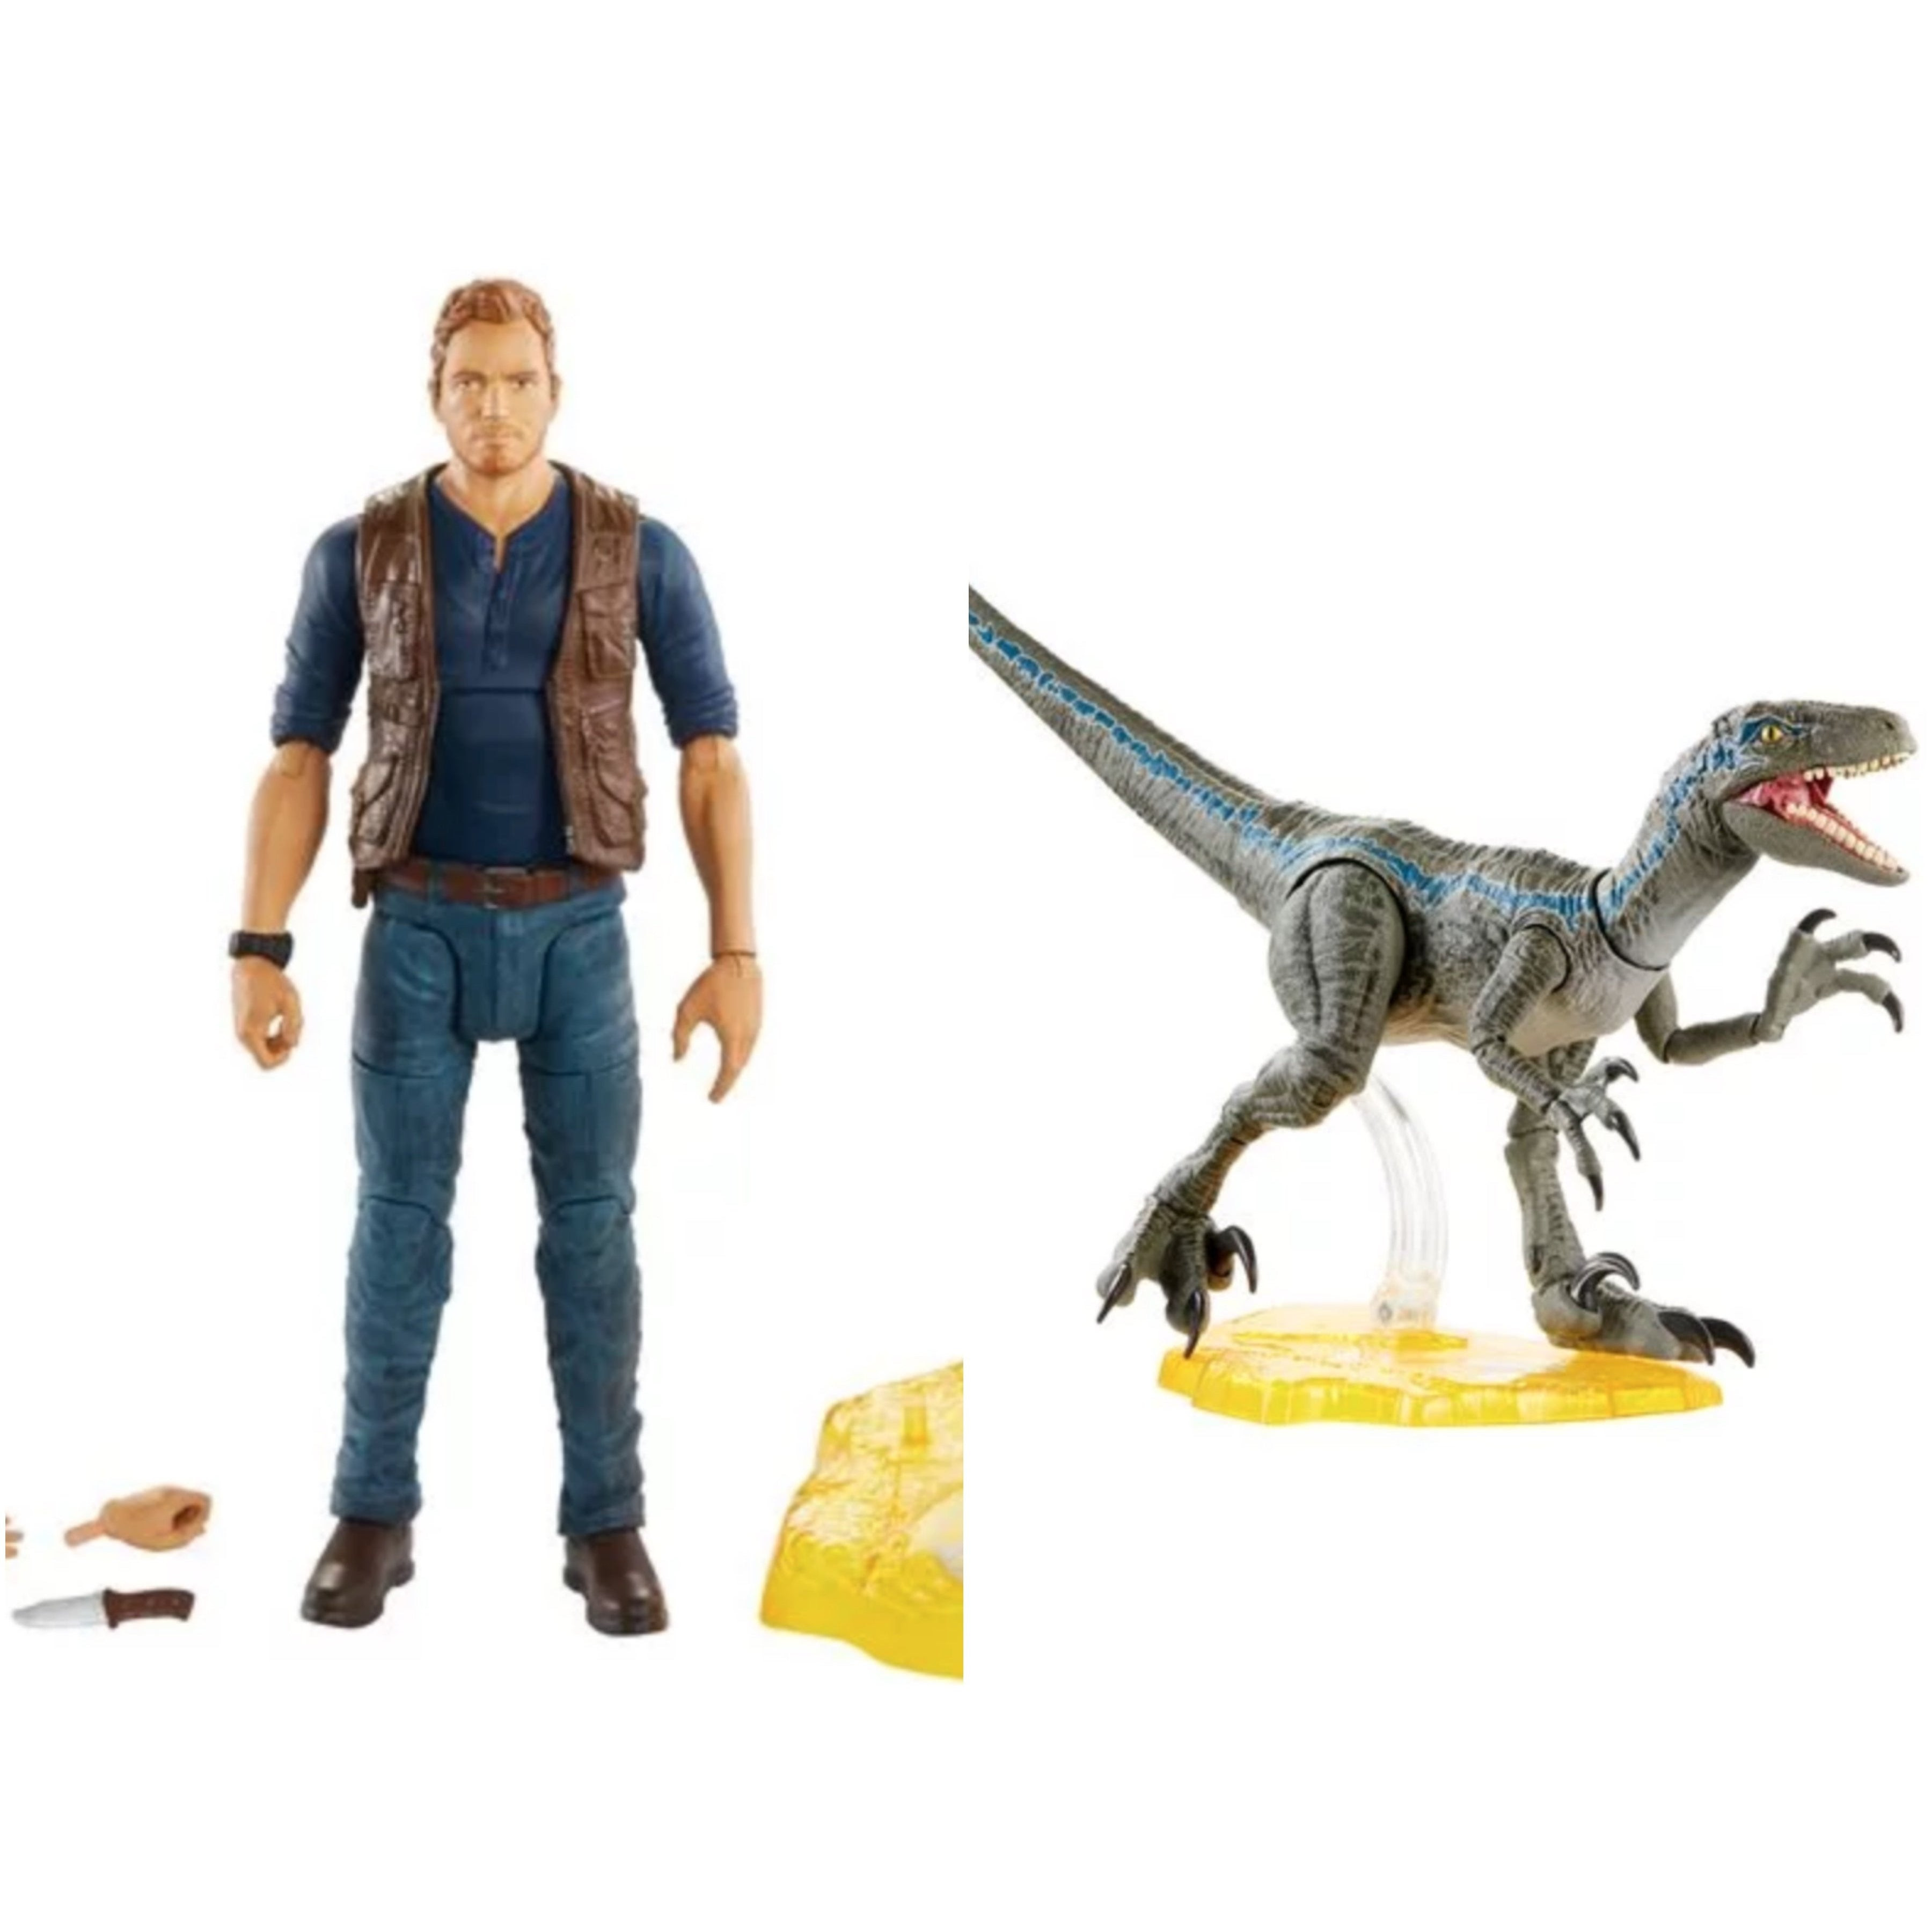 Image of Jurassic World Amber Collection 6" Scale Action Figure Set of 2 Owen and Blue